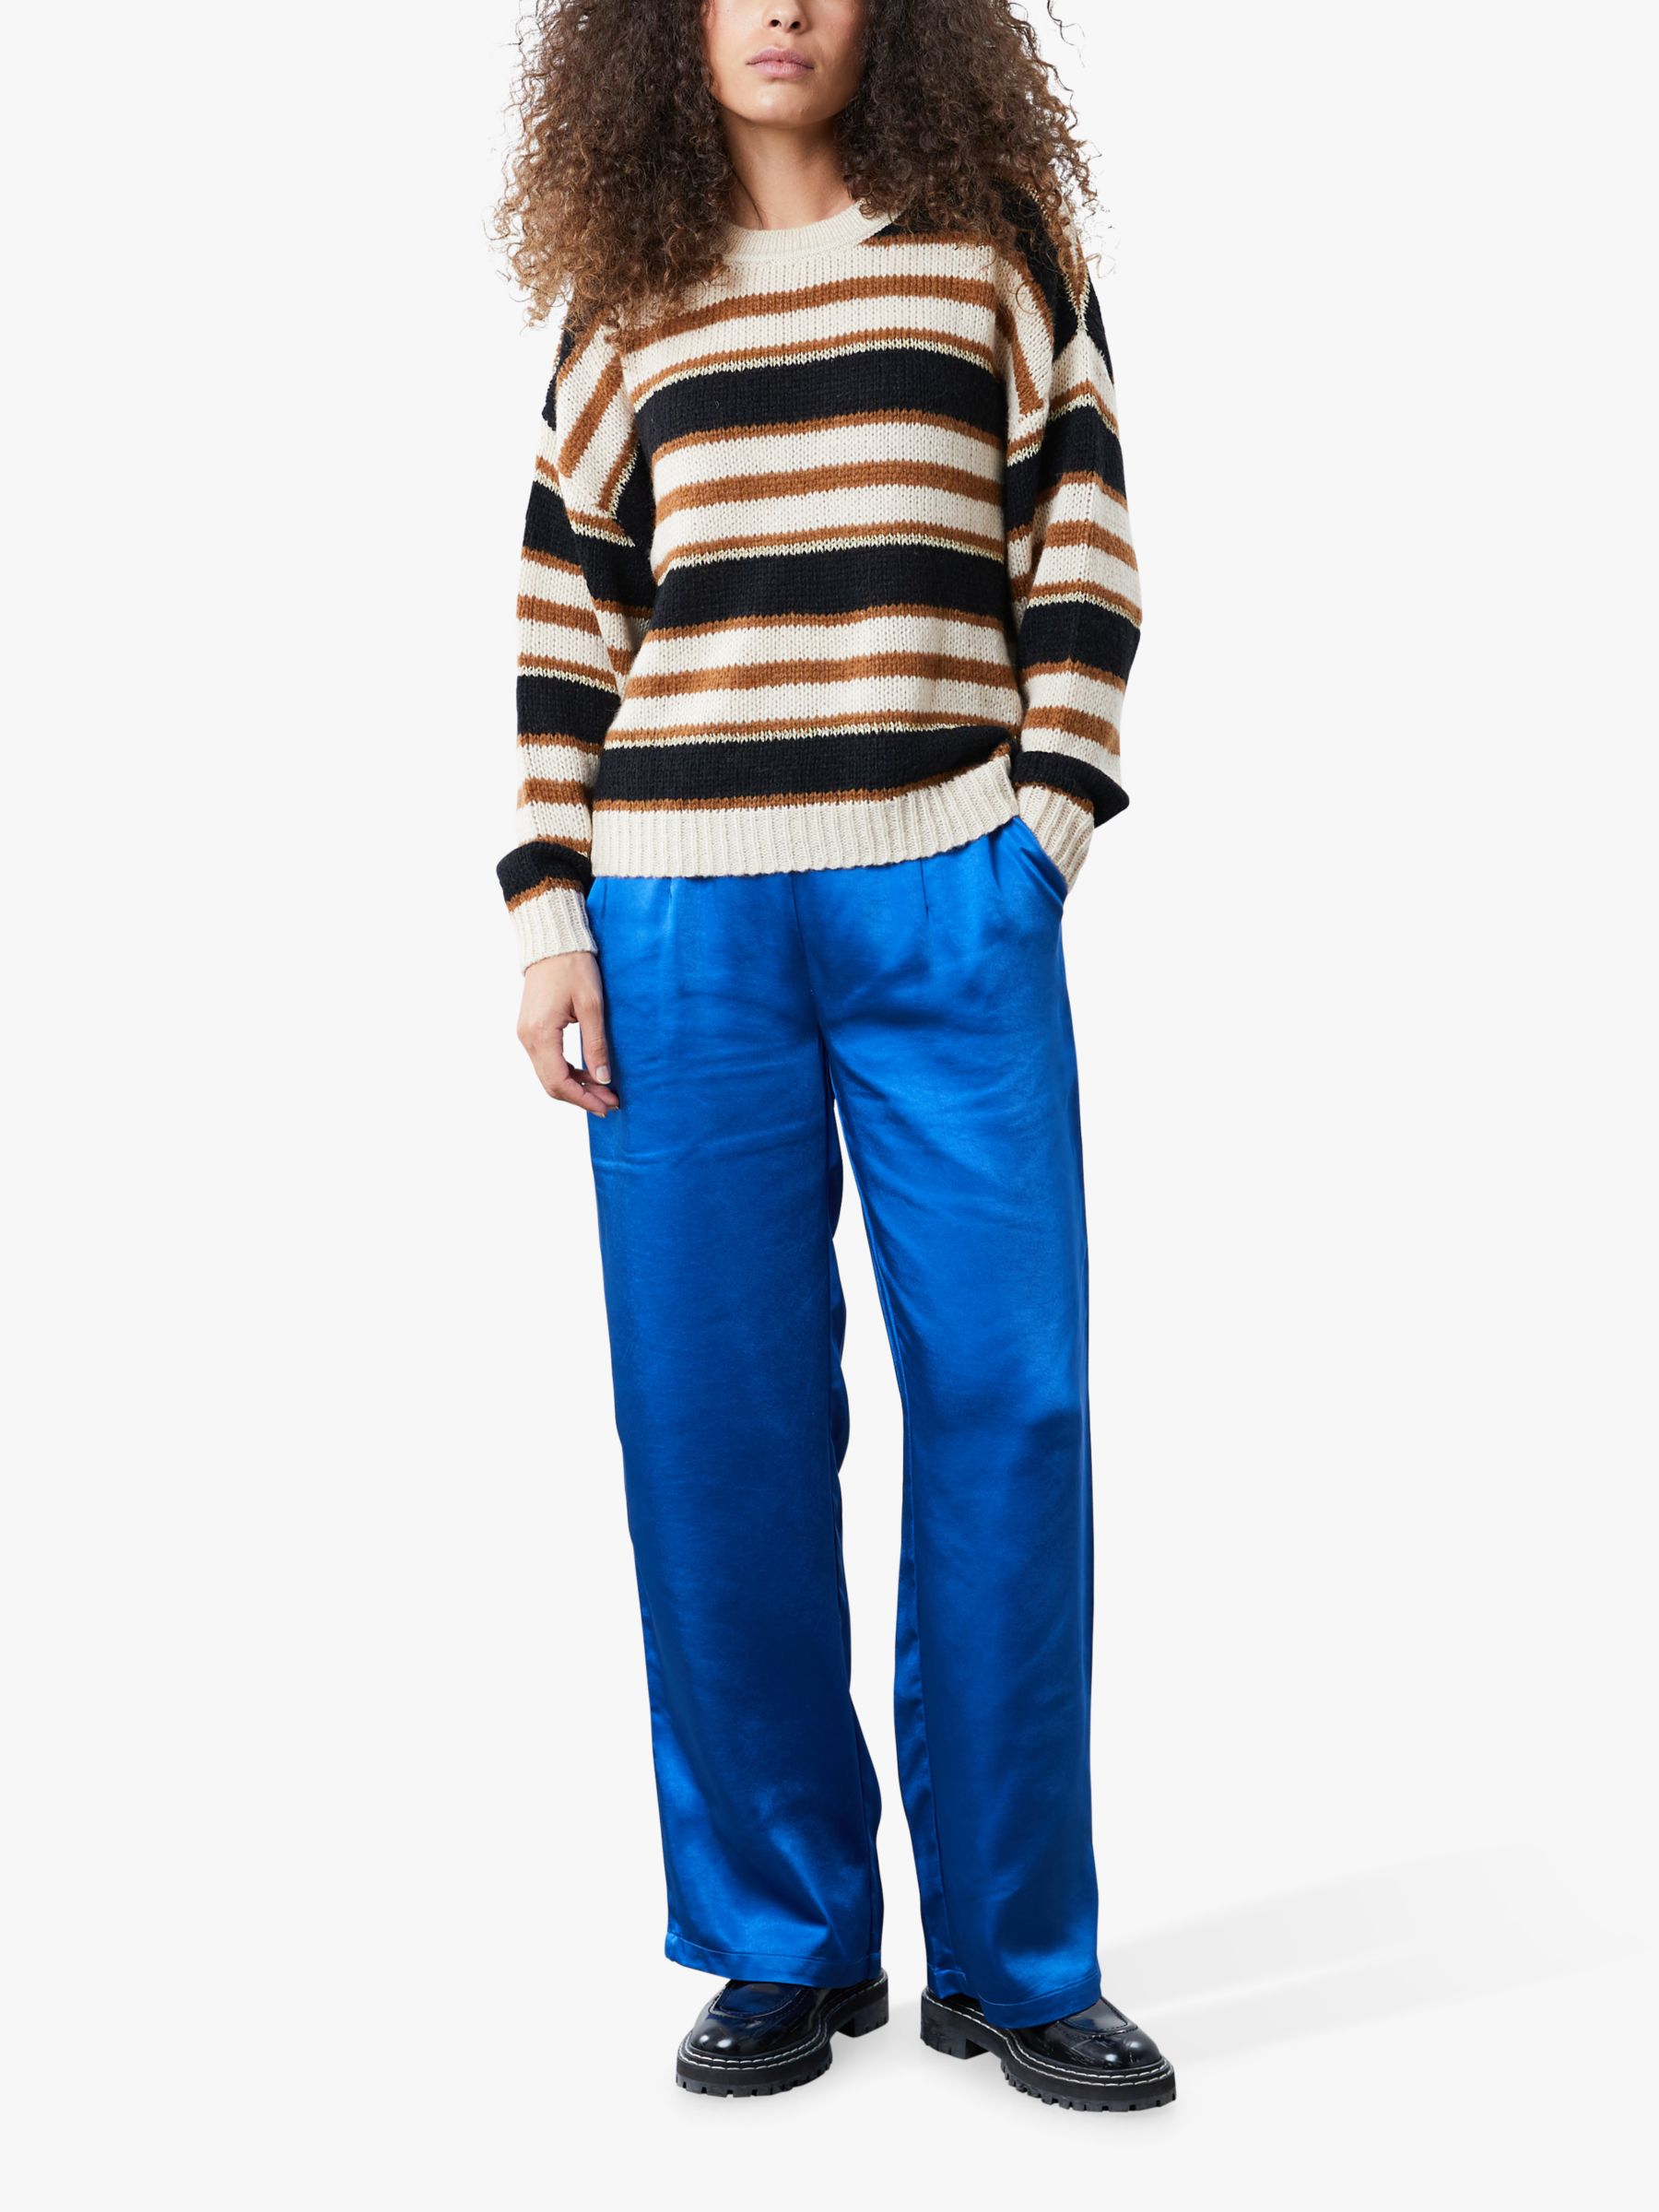 Lollys Laundry Terry Striped Jumper, Cream/Multi at John Lewis & Partners